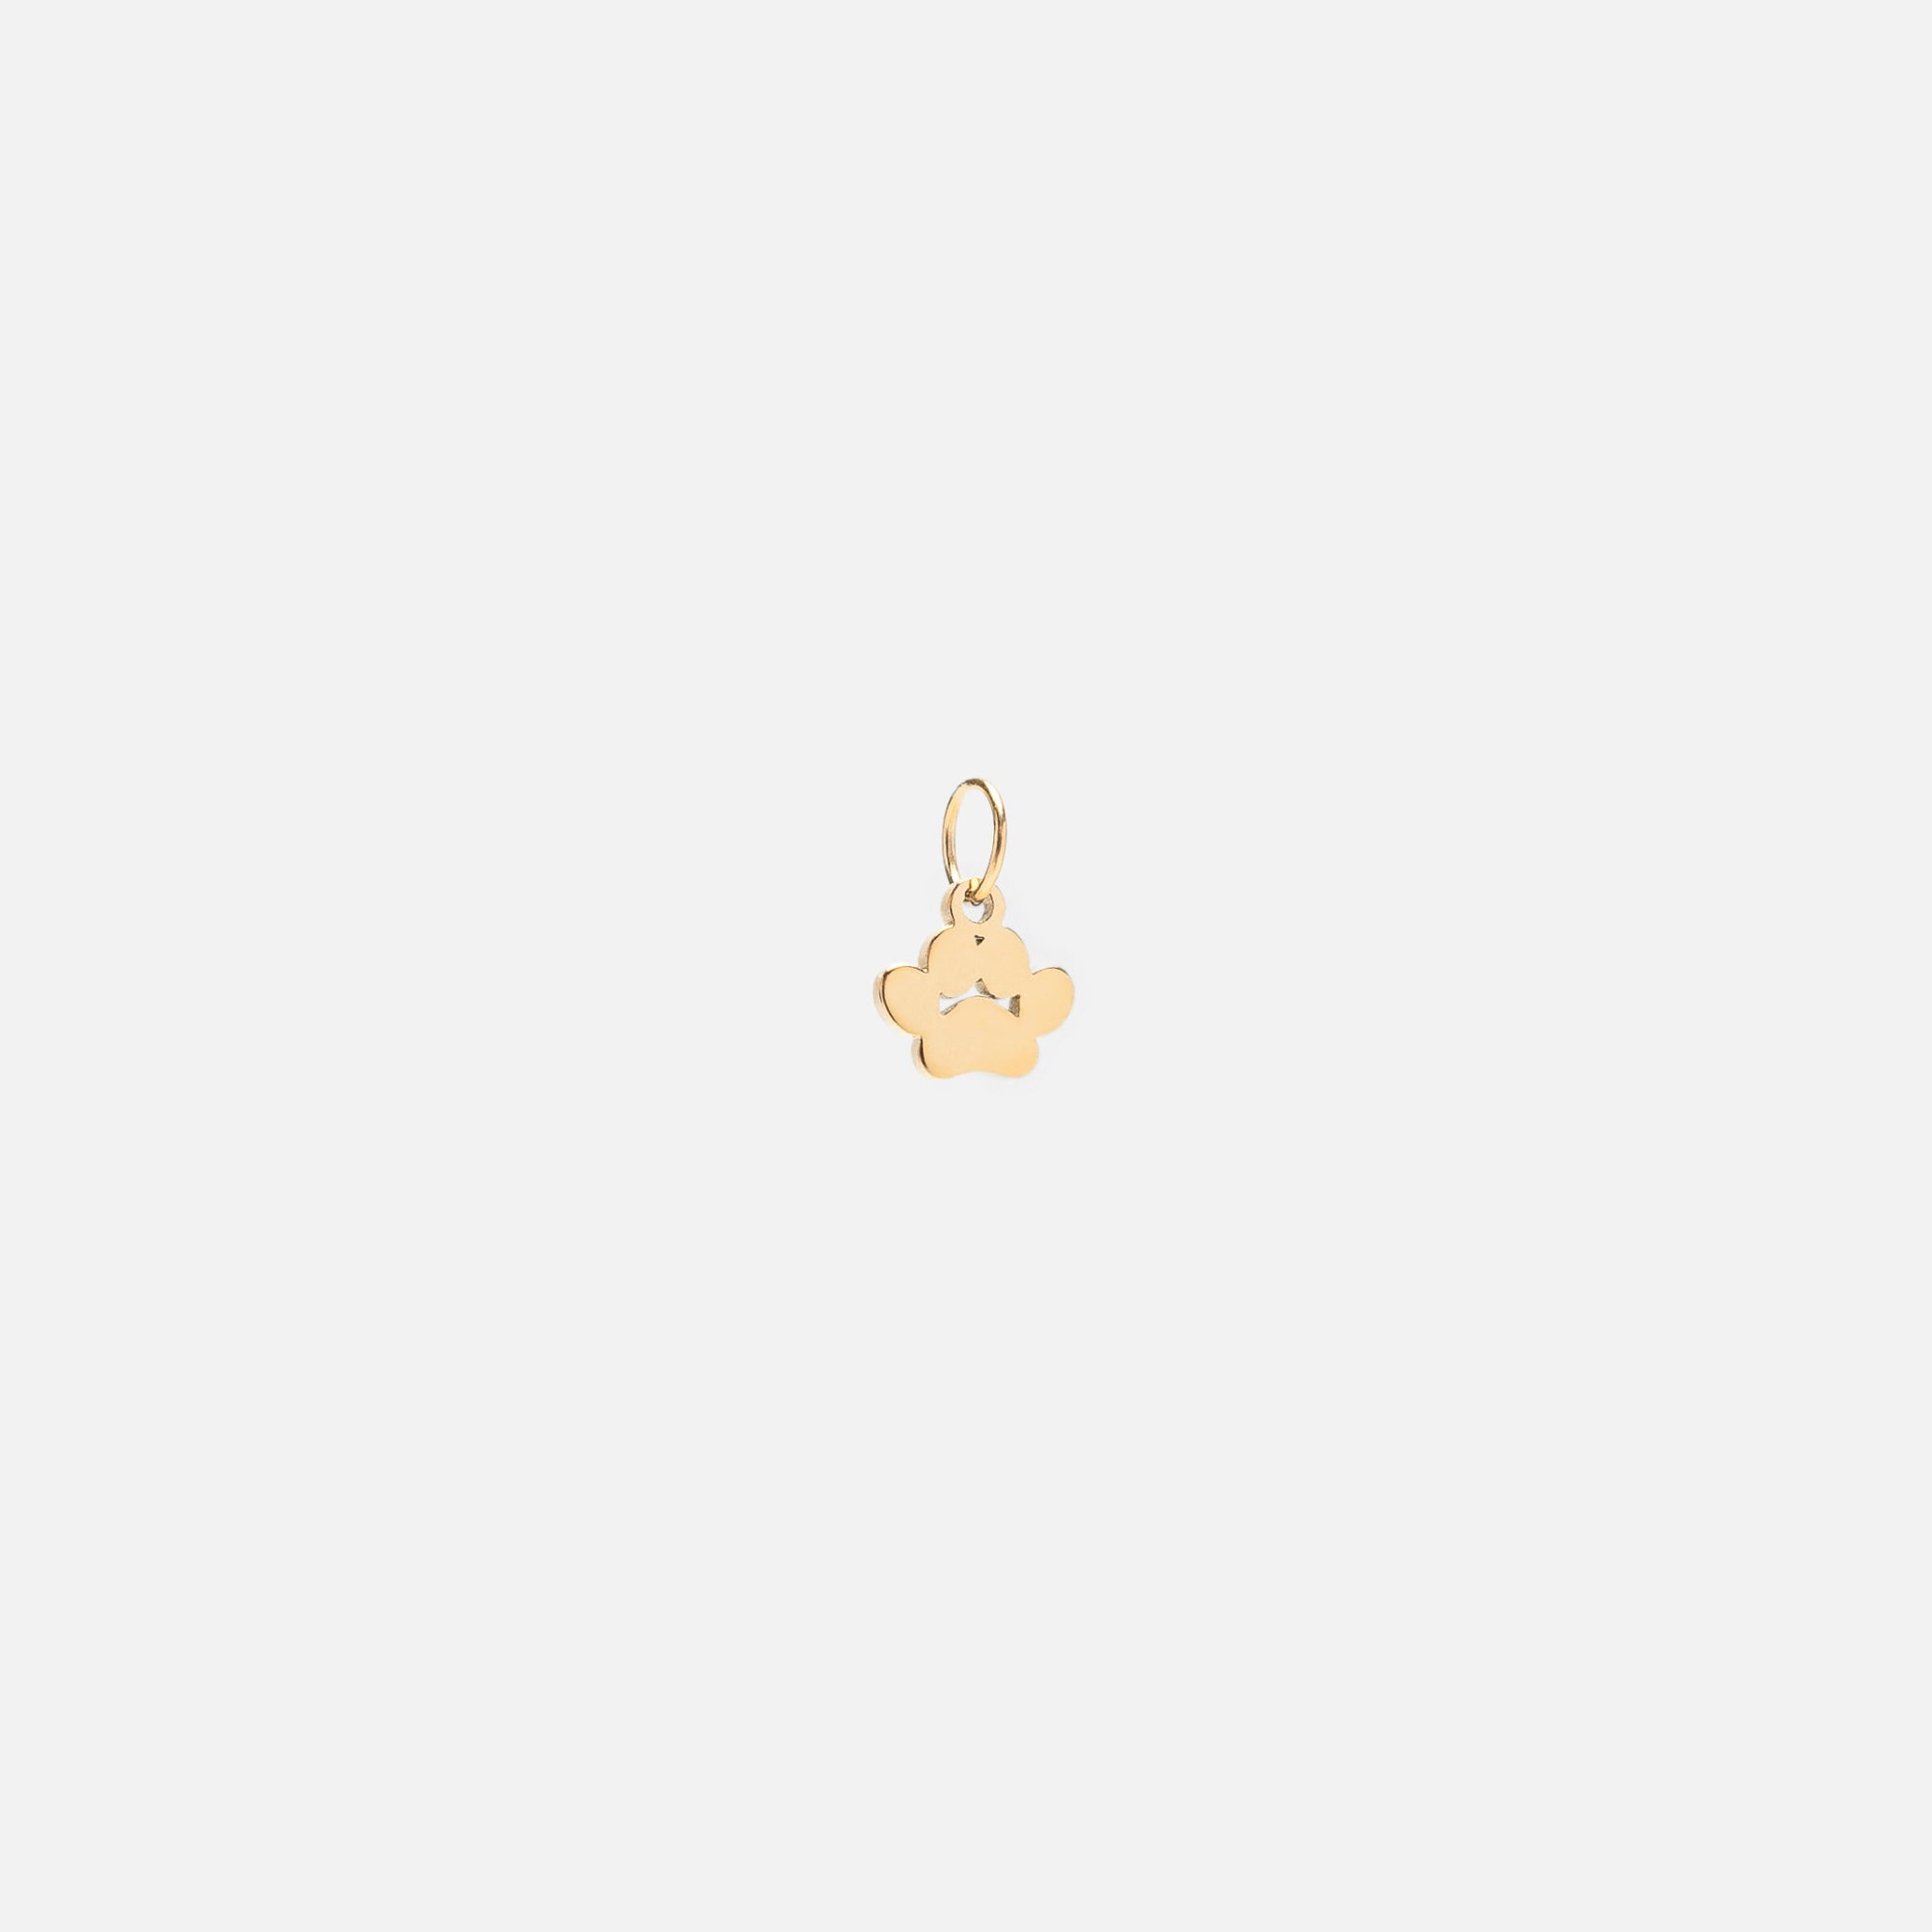 Small golden paw charm